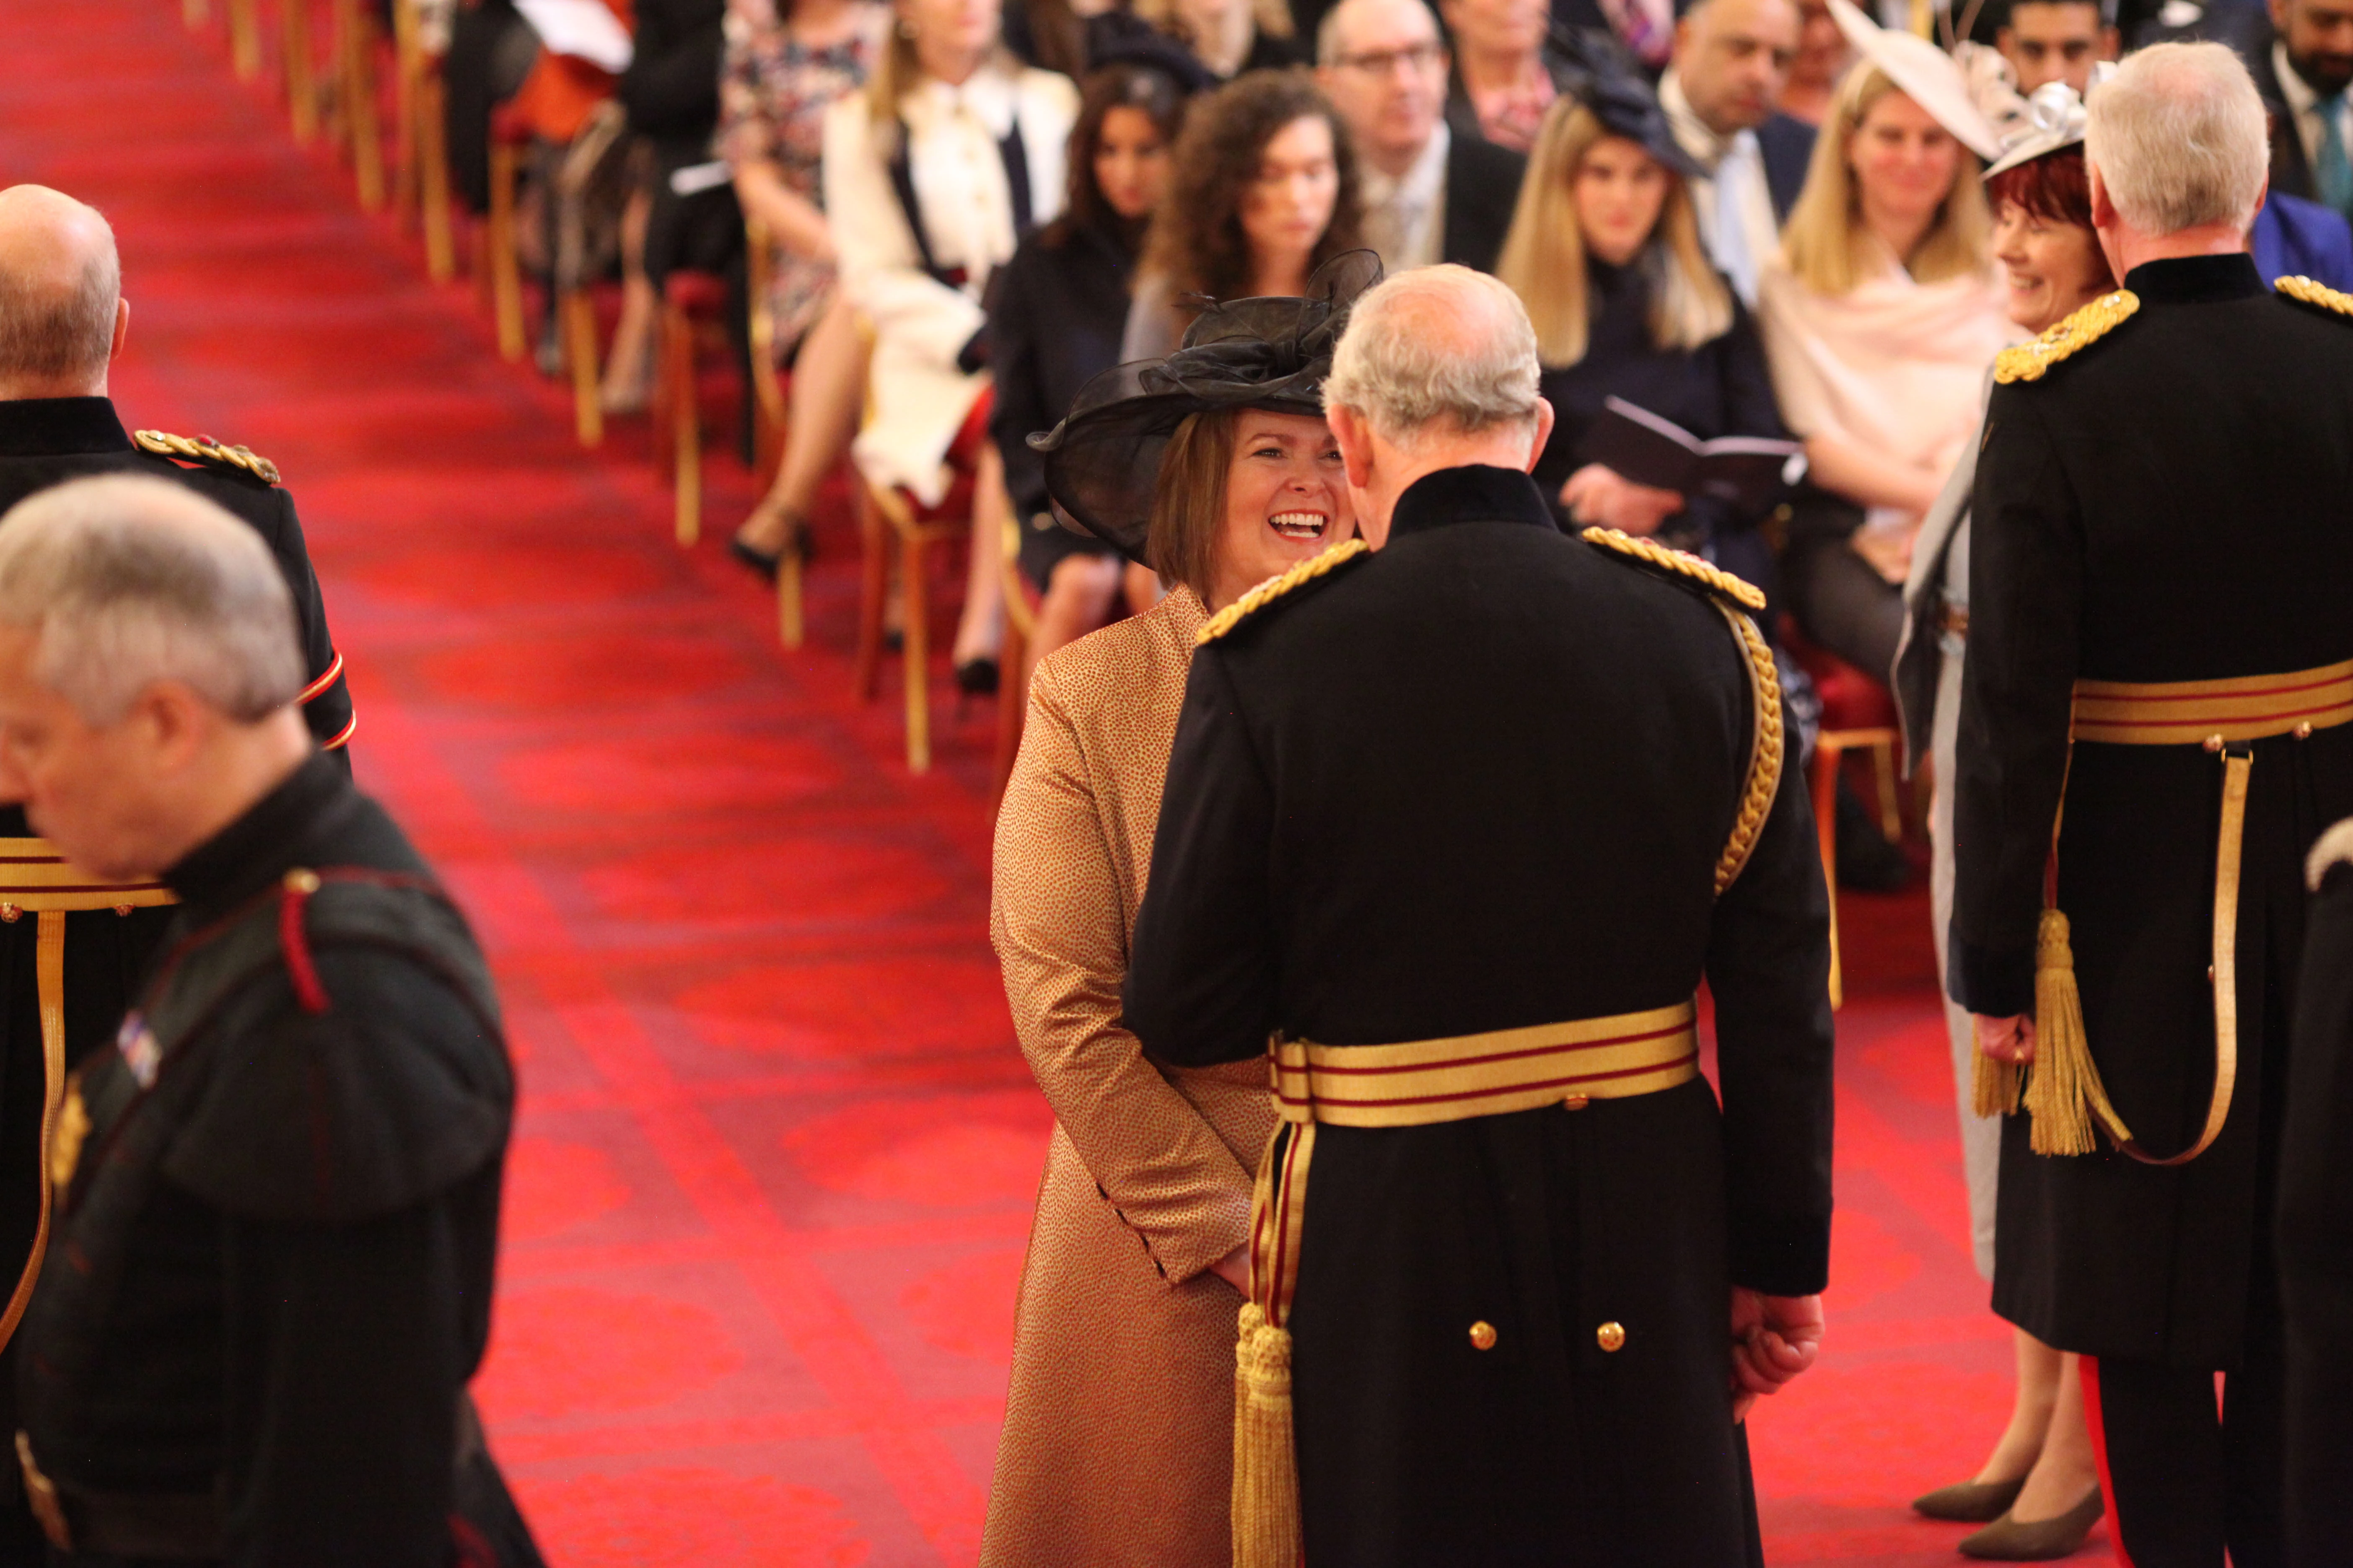 Blackpool and The Fylde College Principal and Chief Executive Bev Robinson receiving her OBE from the Prince of Wales